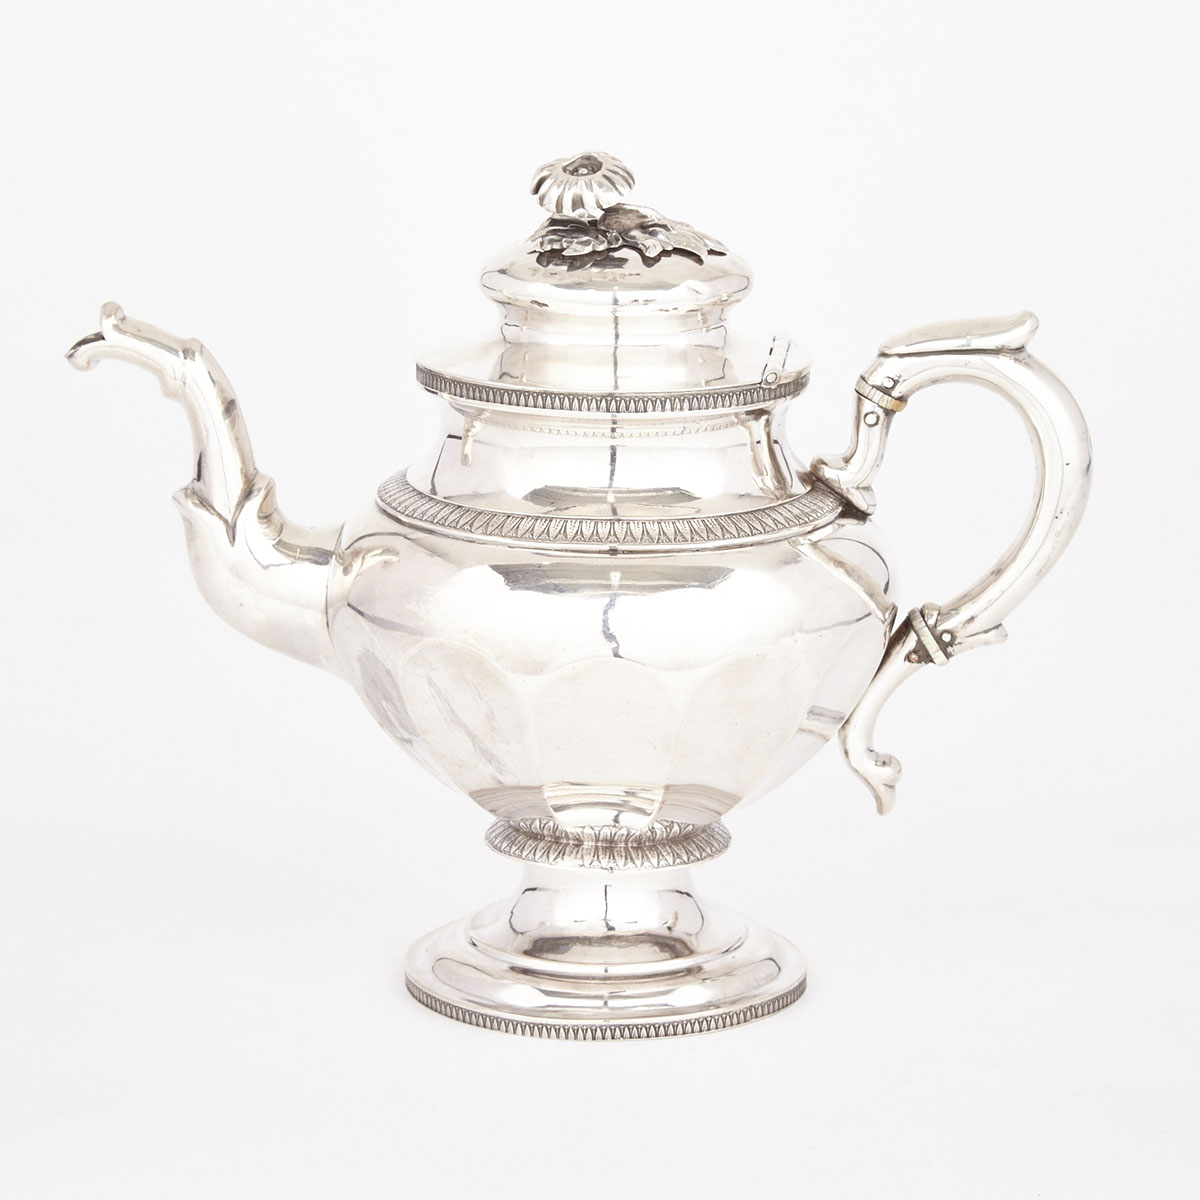 Continental Silver Coffee Pot, probably Austro-Hungarian, 19th century